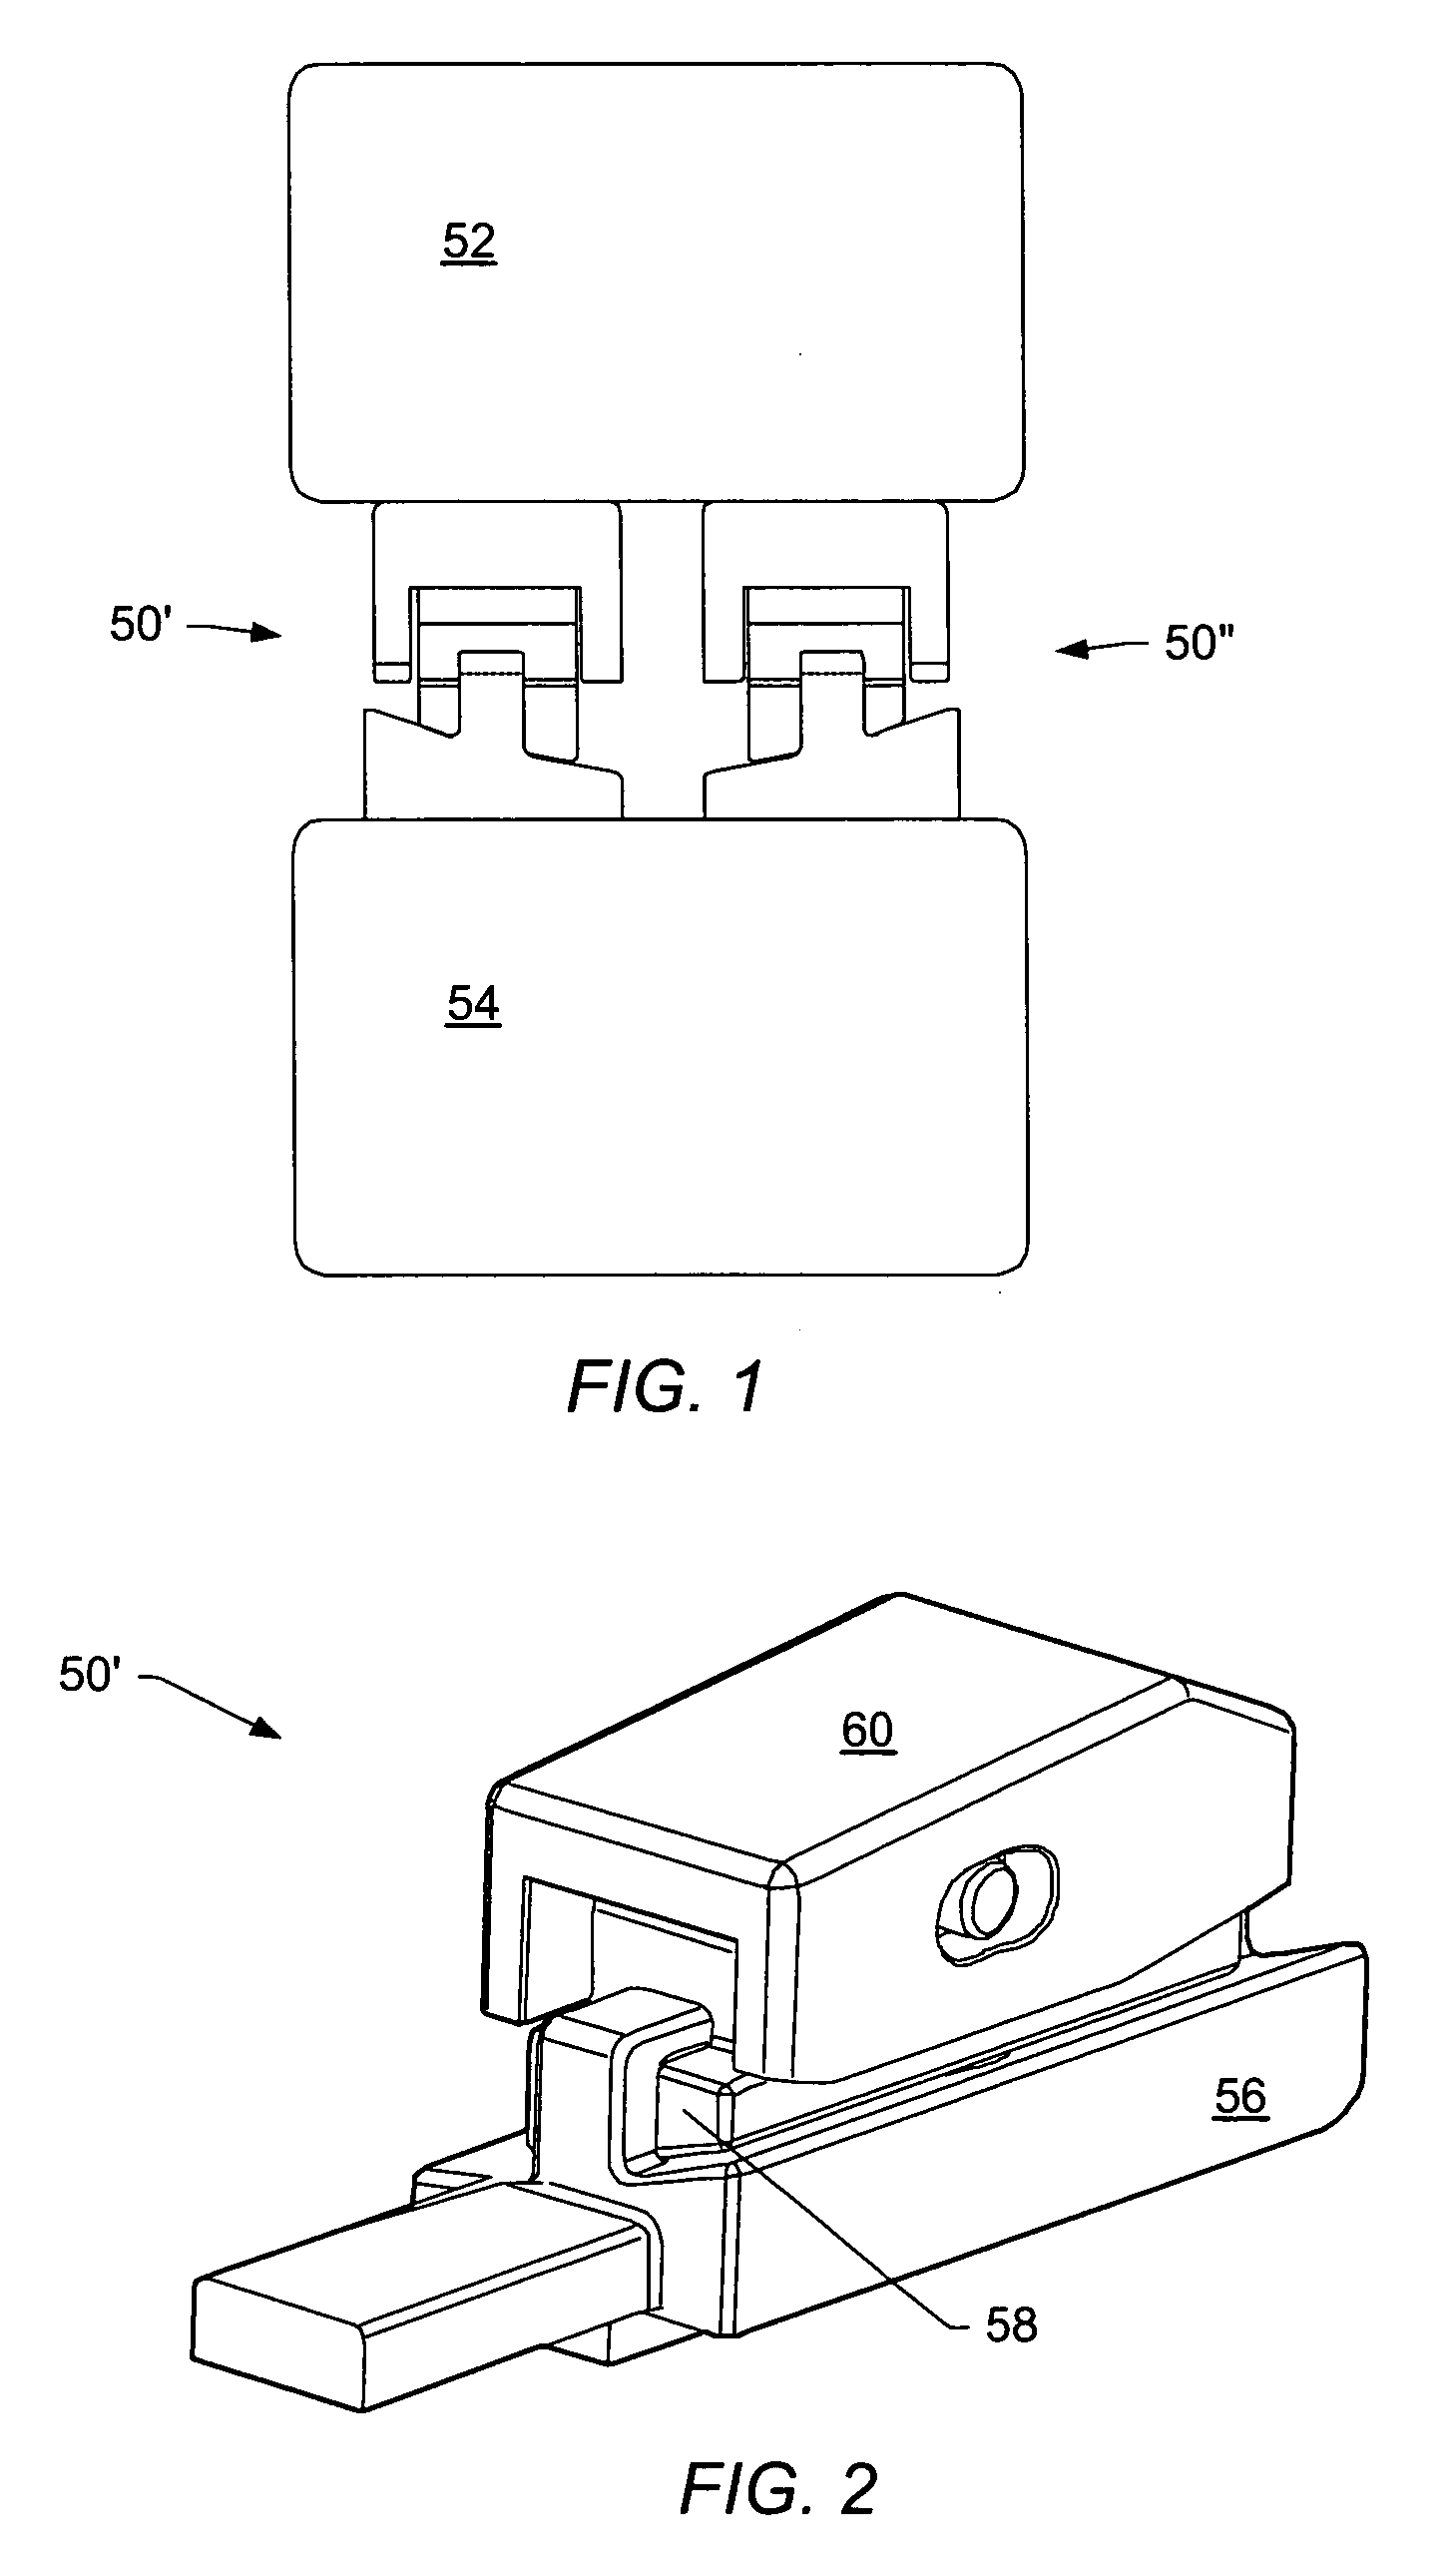 Artificial functional spinal implant unit system and method for use